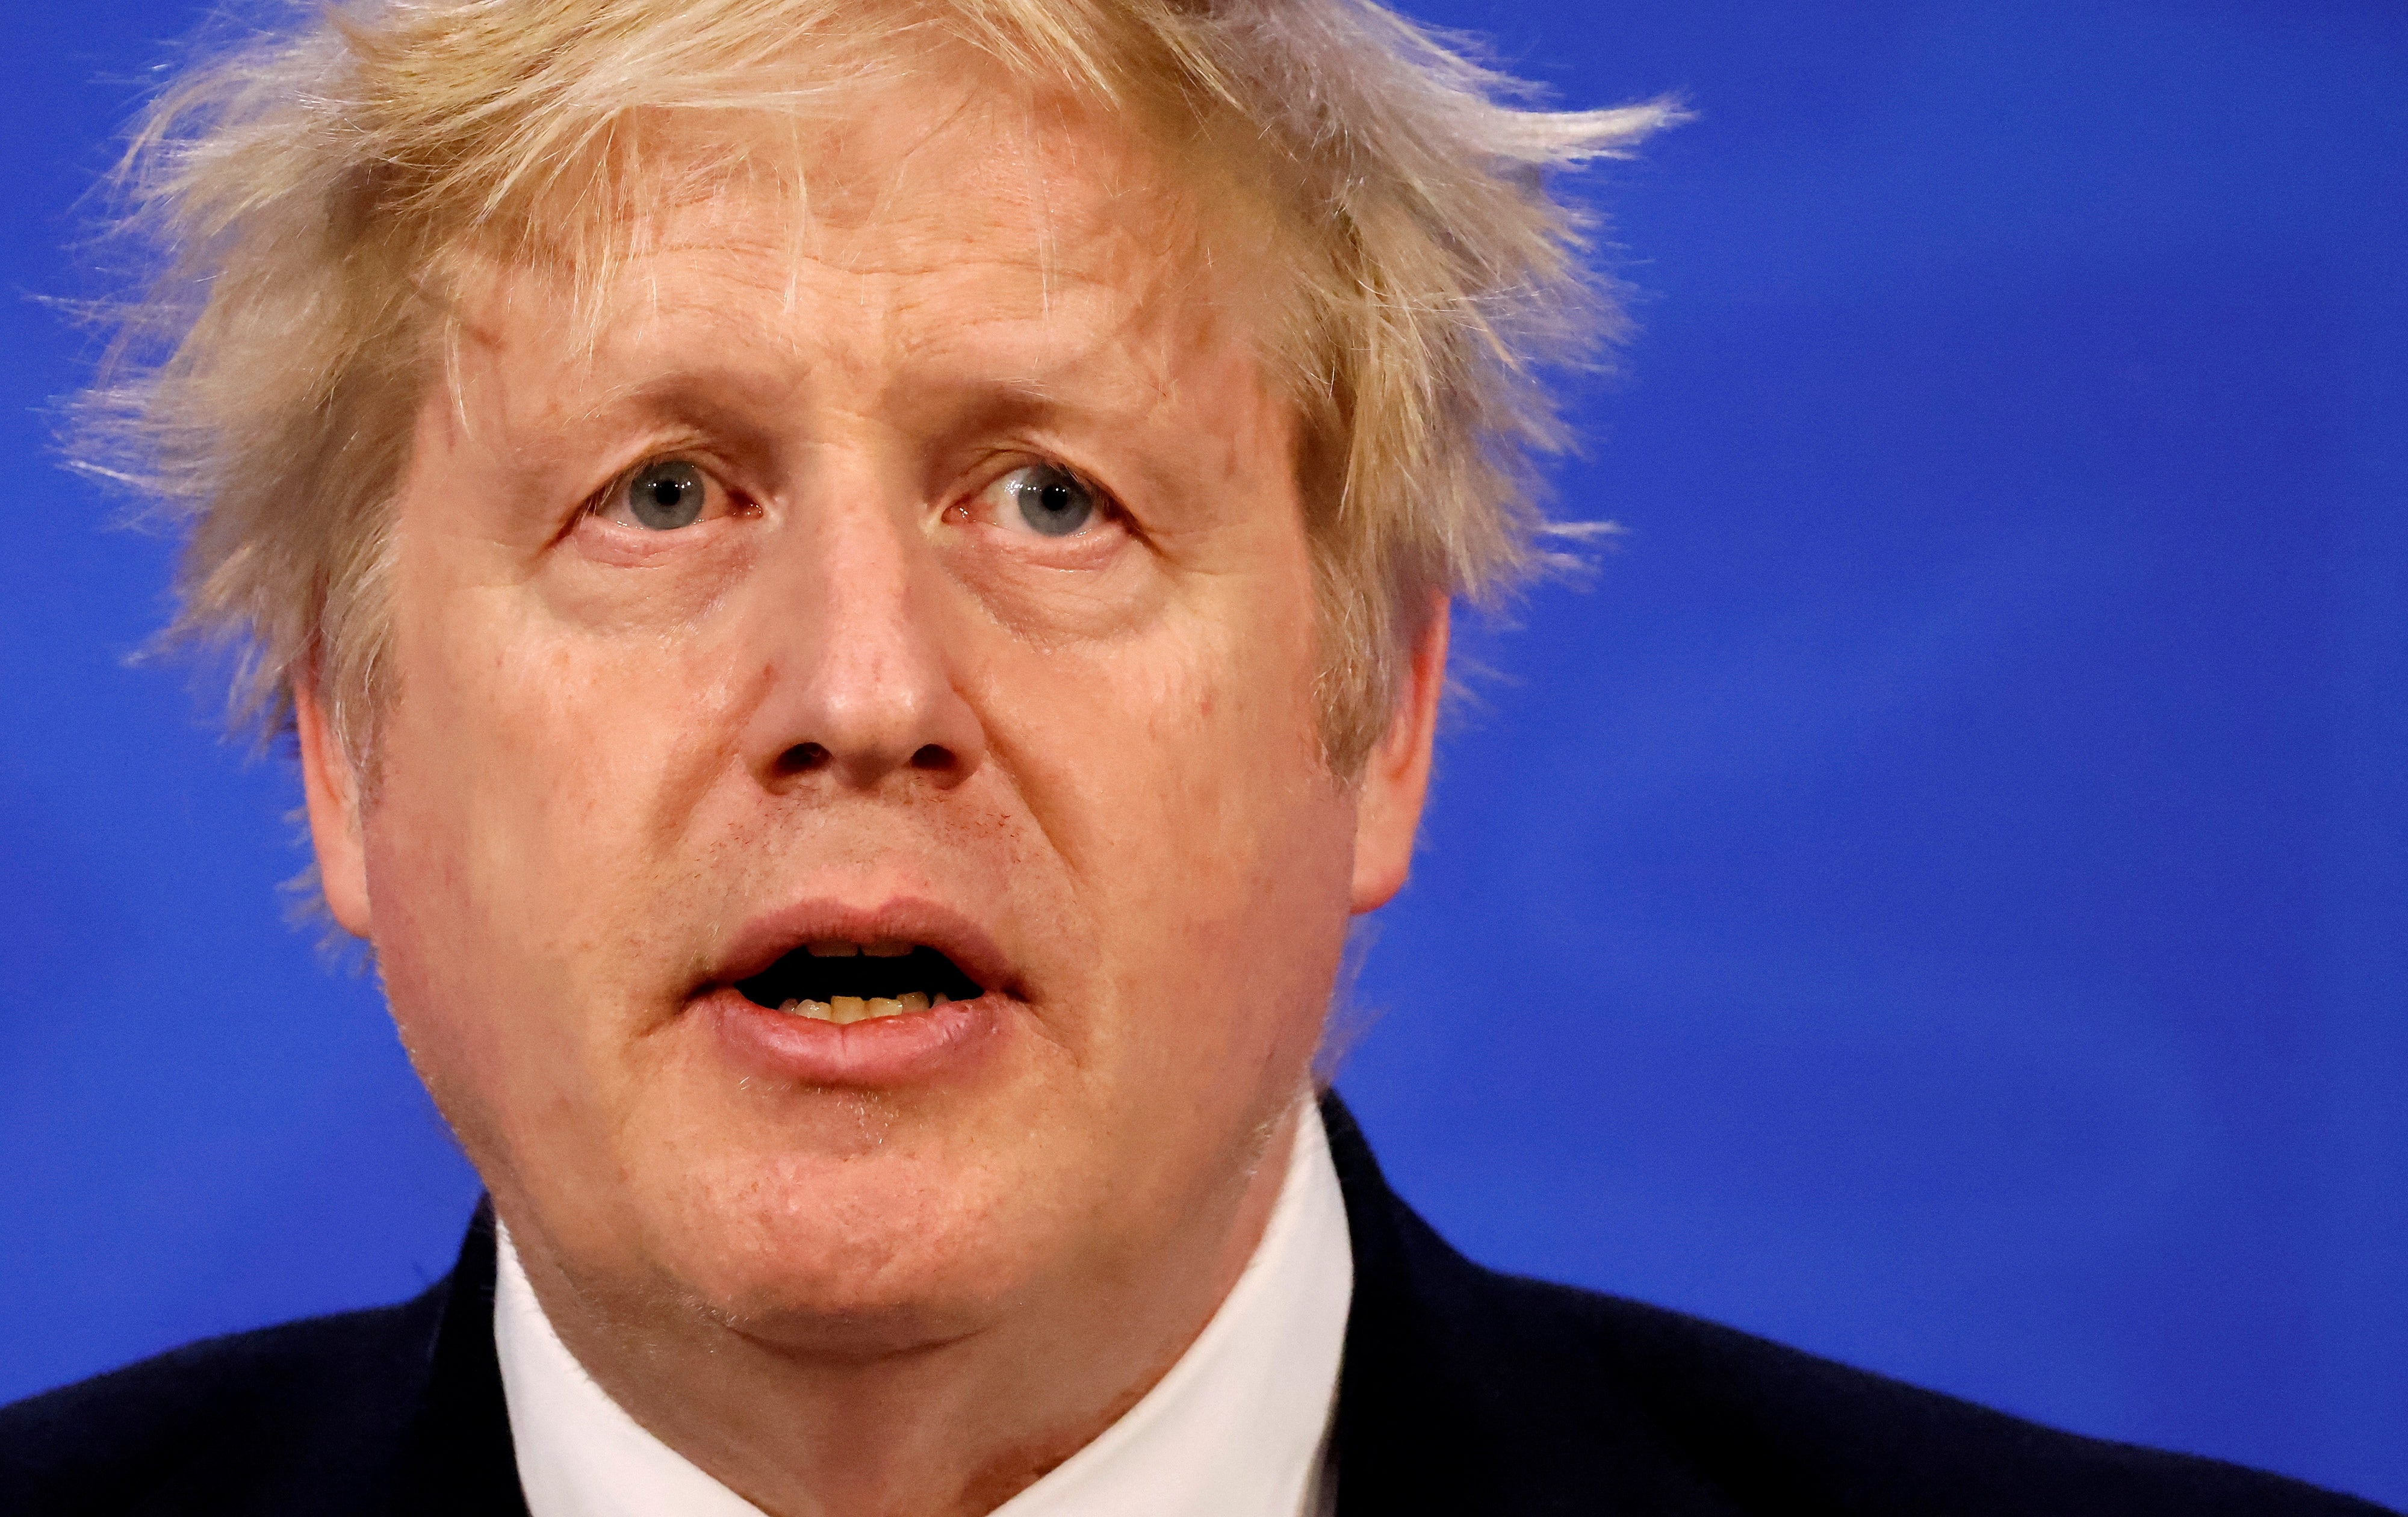 Boris Johnson during a news conference to outline the government’s new long-term coronavirus plan